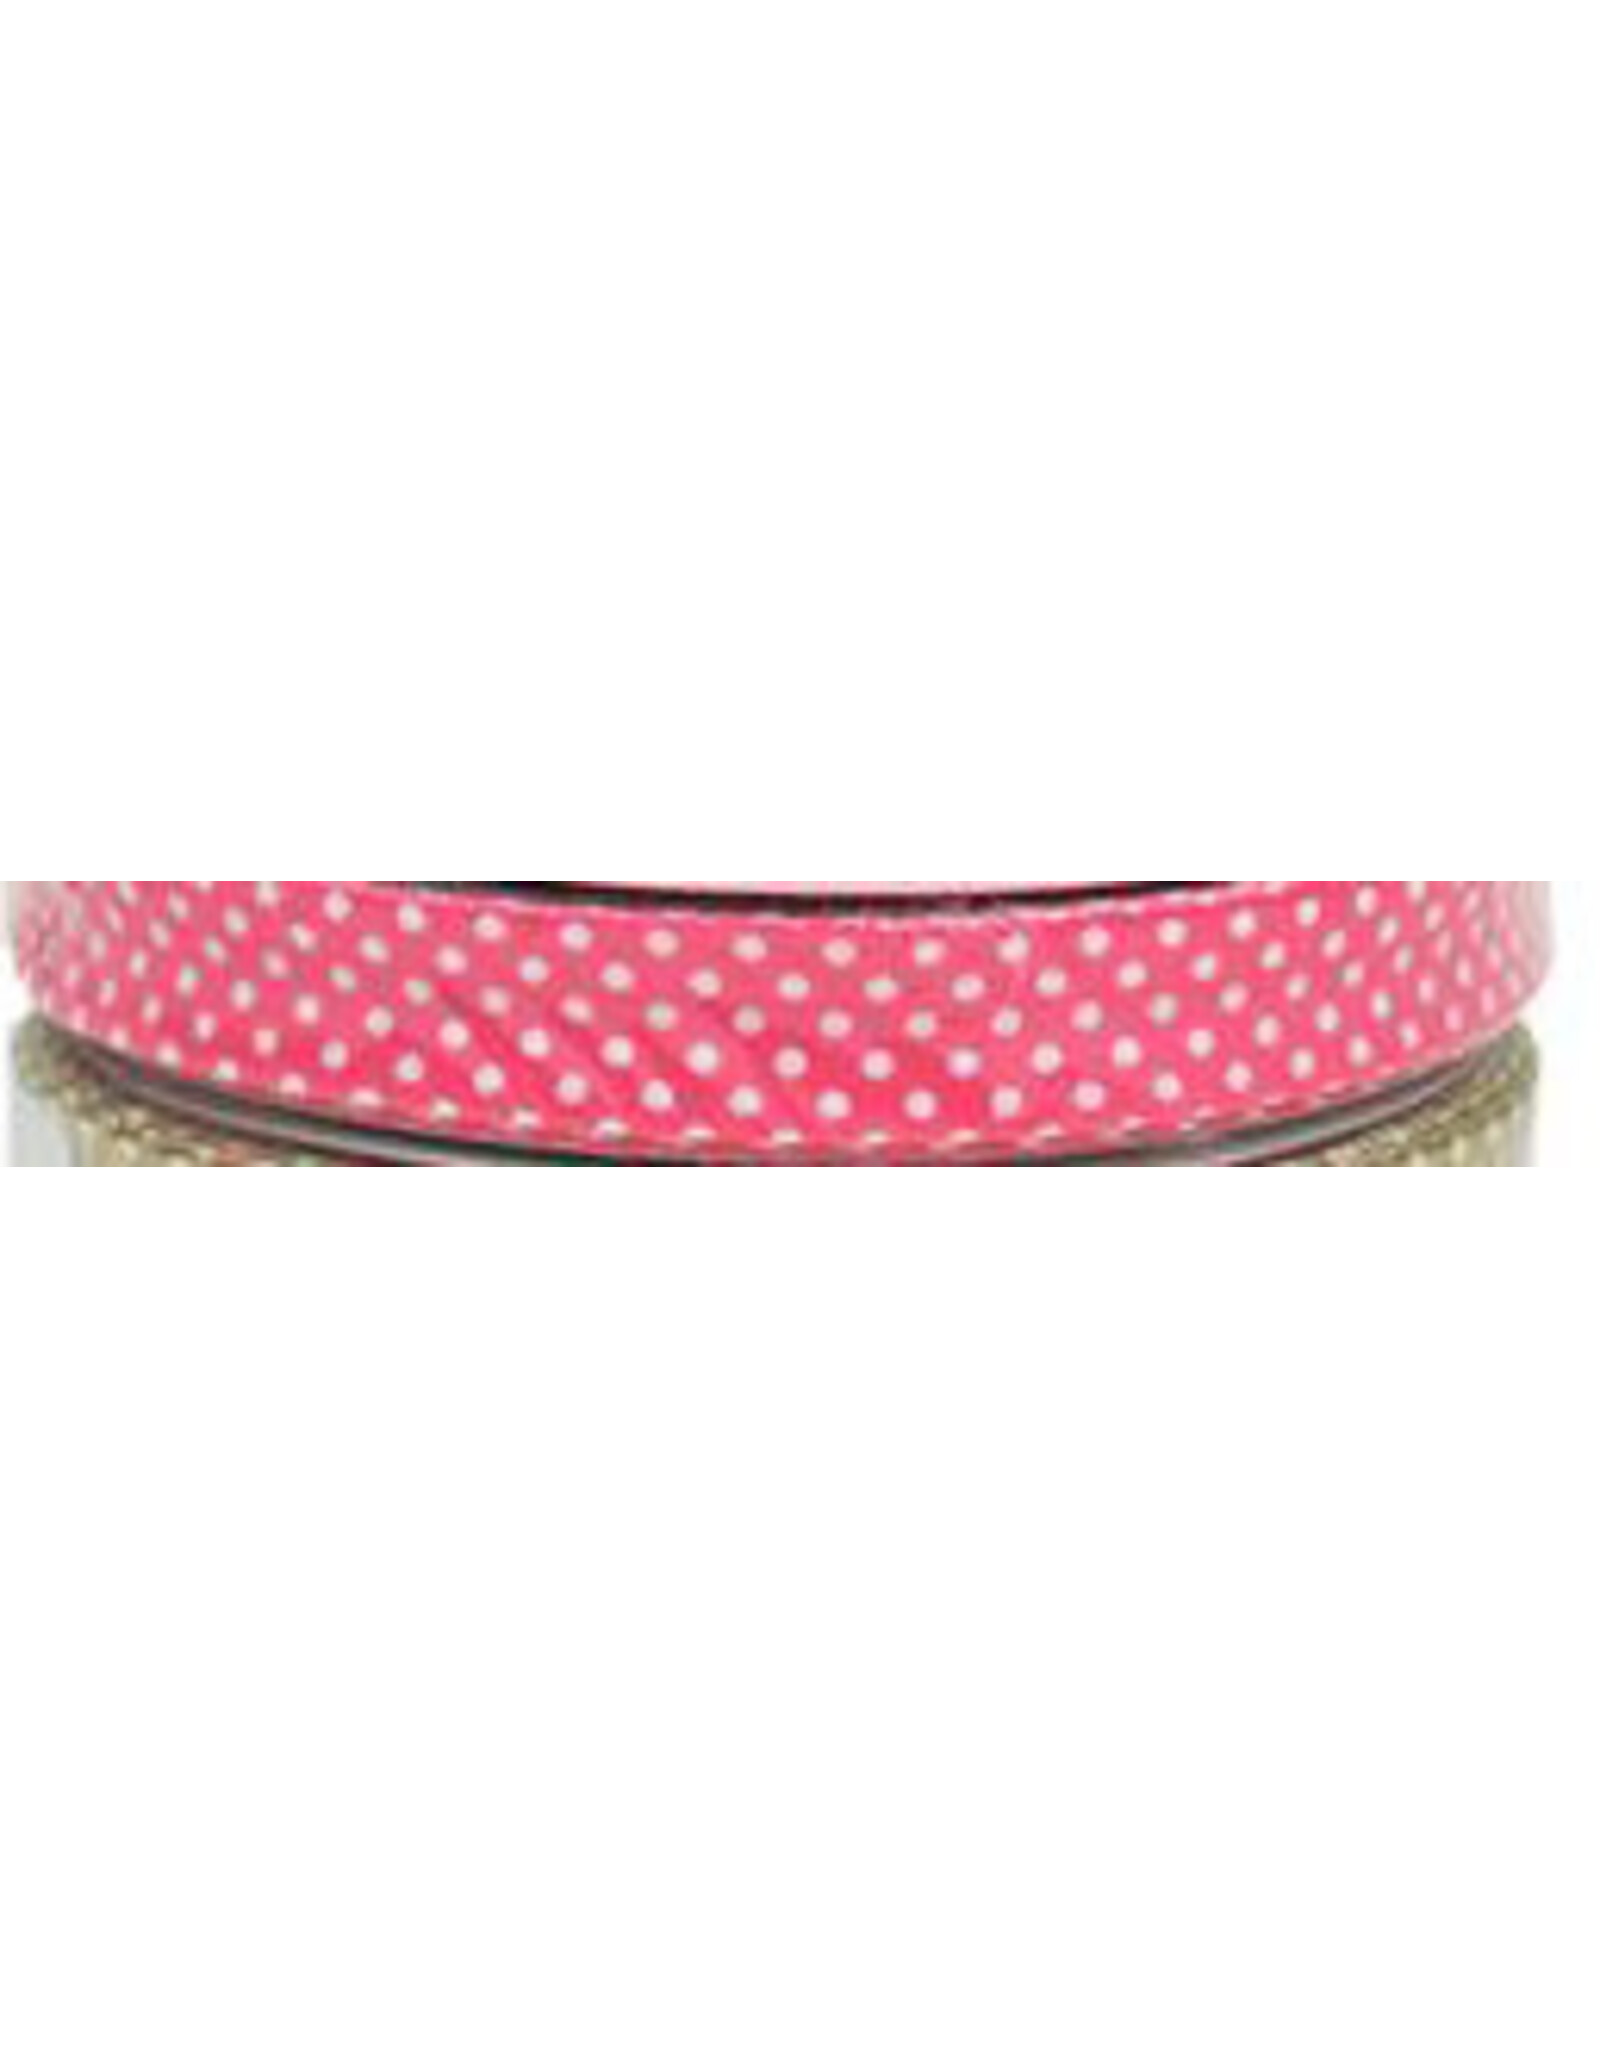 Restyle Biais Tape - 1 meter - Dot - Pink - 18 mm